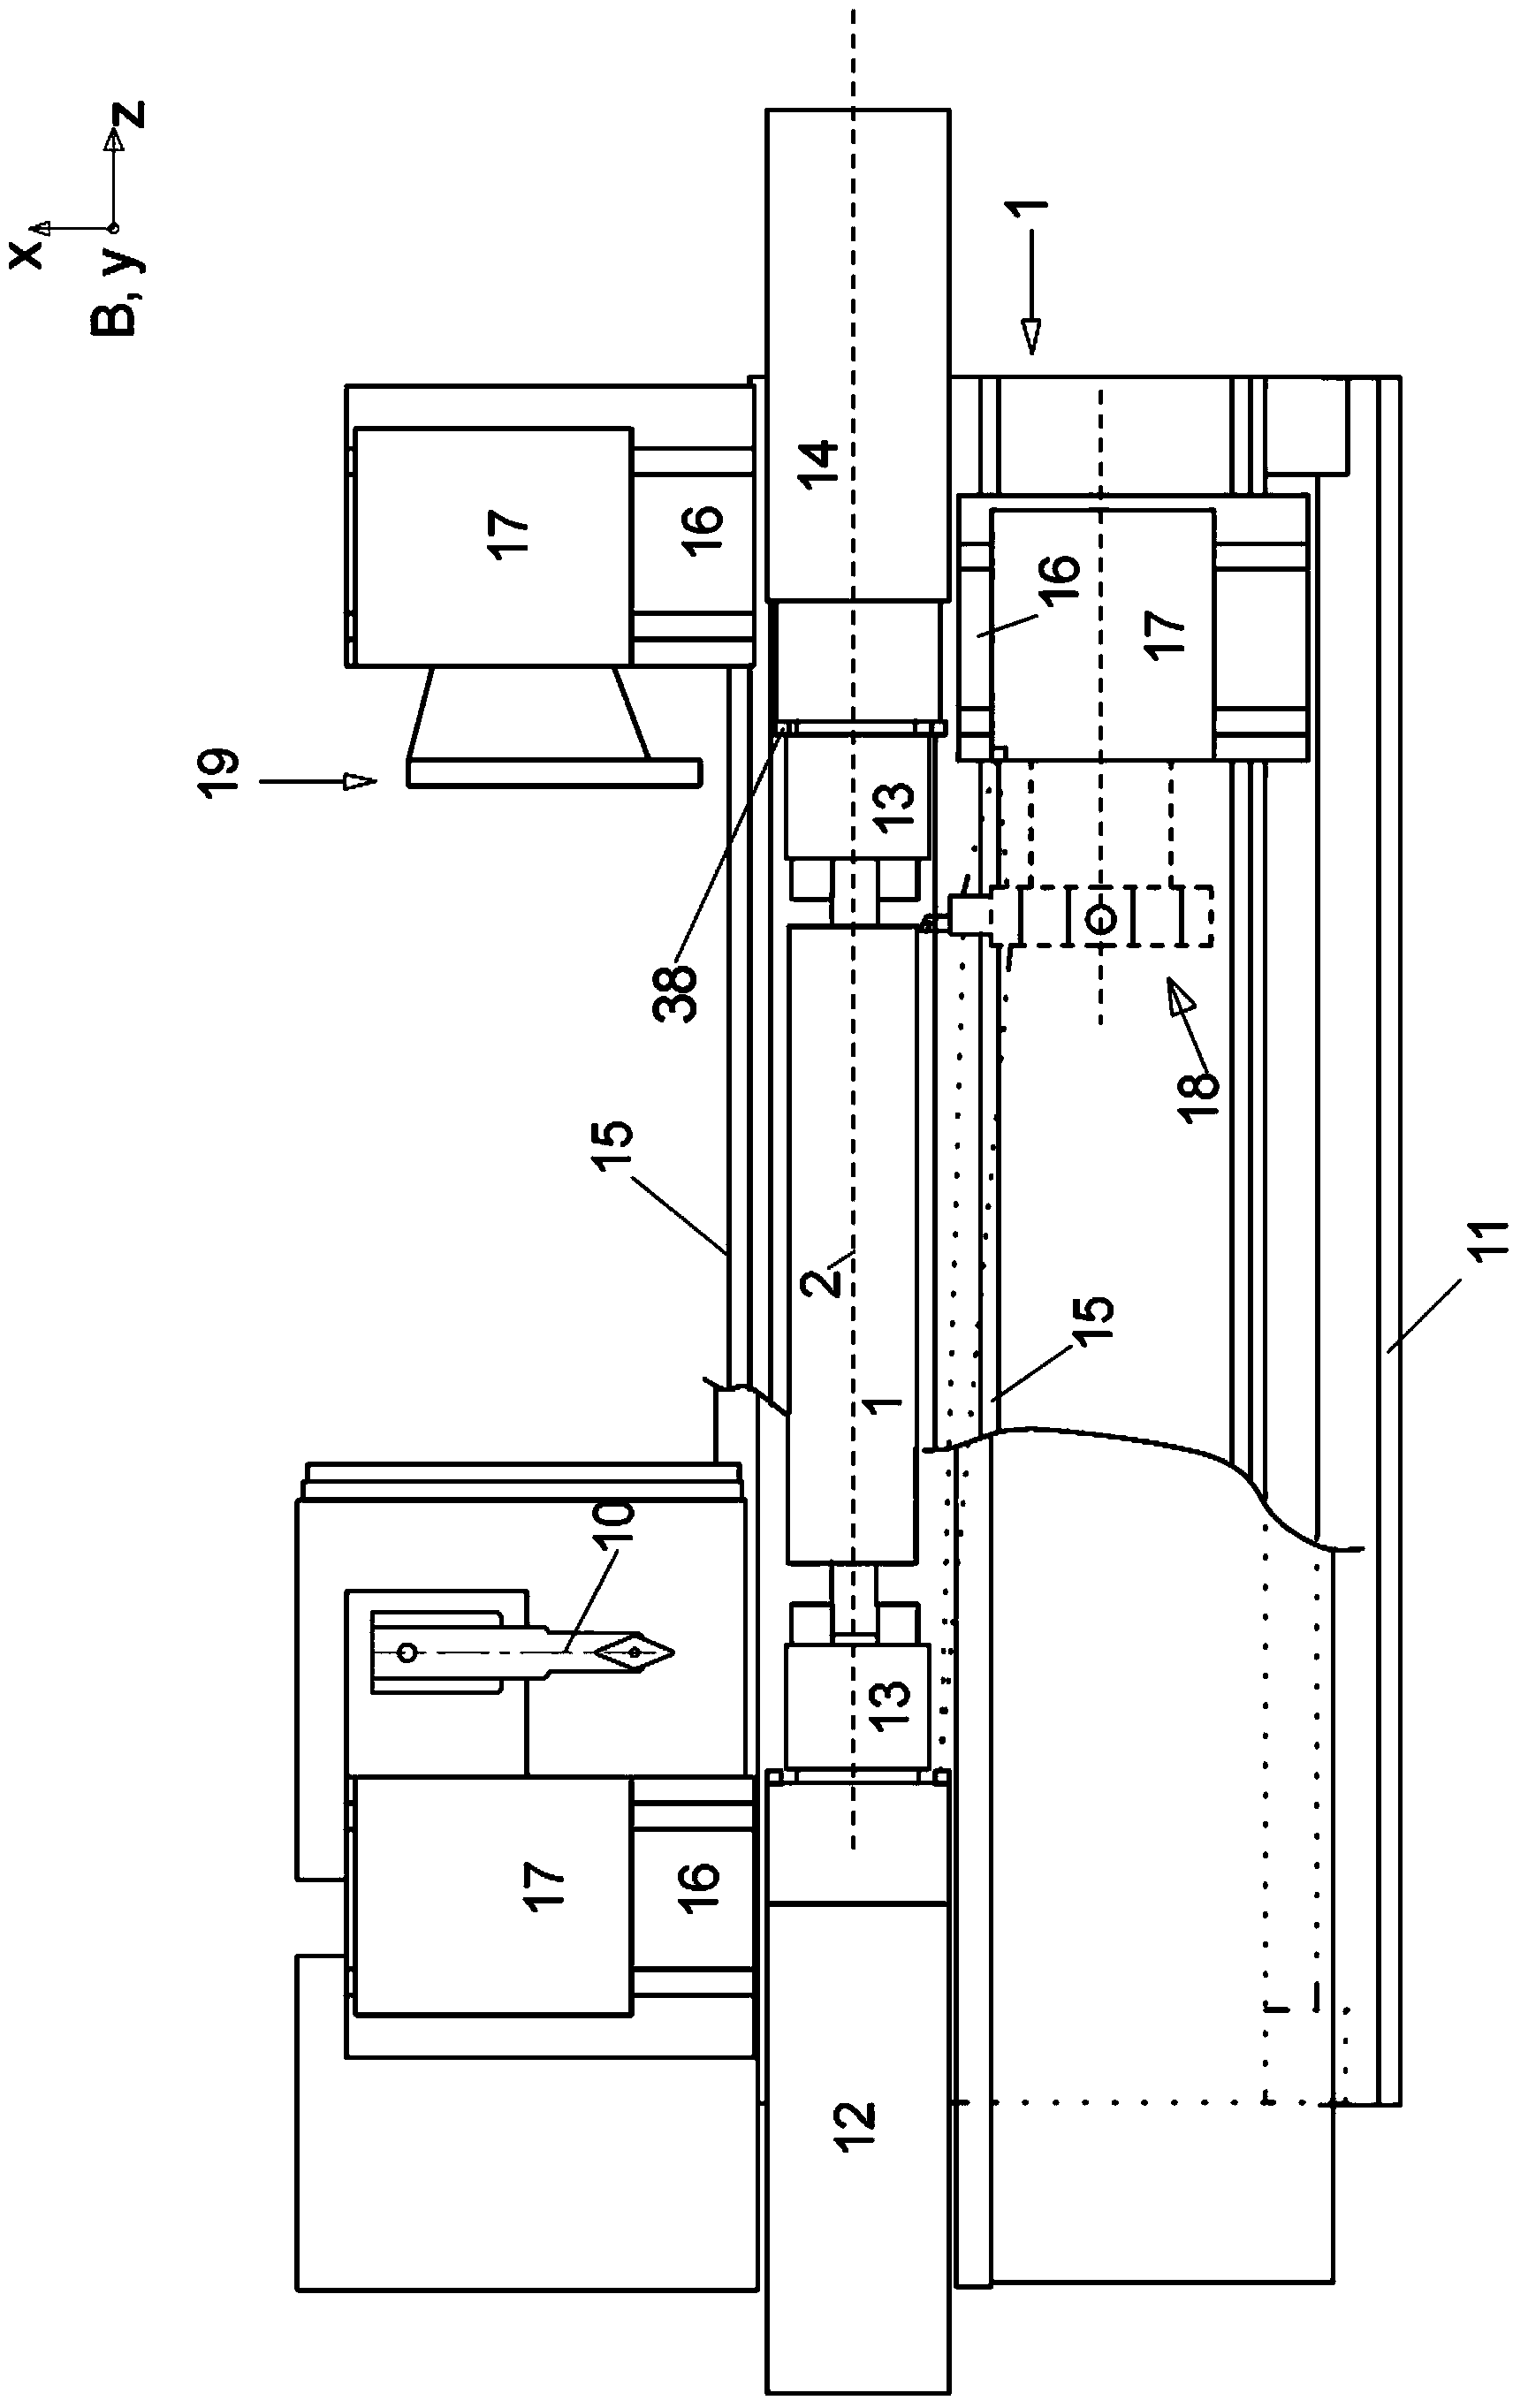 Method and device for finishing workpieces